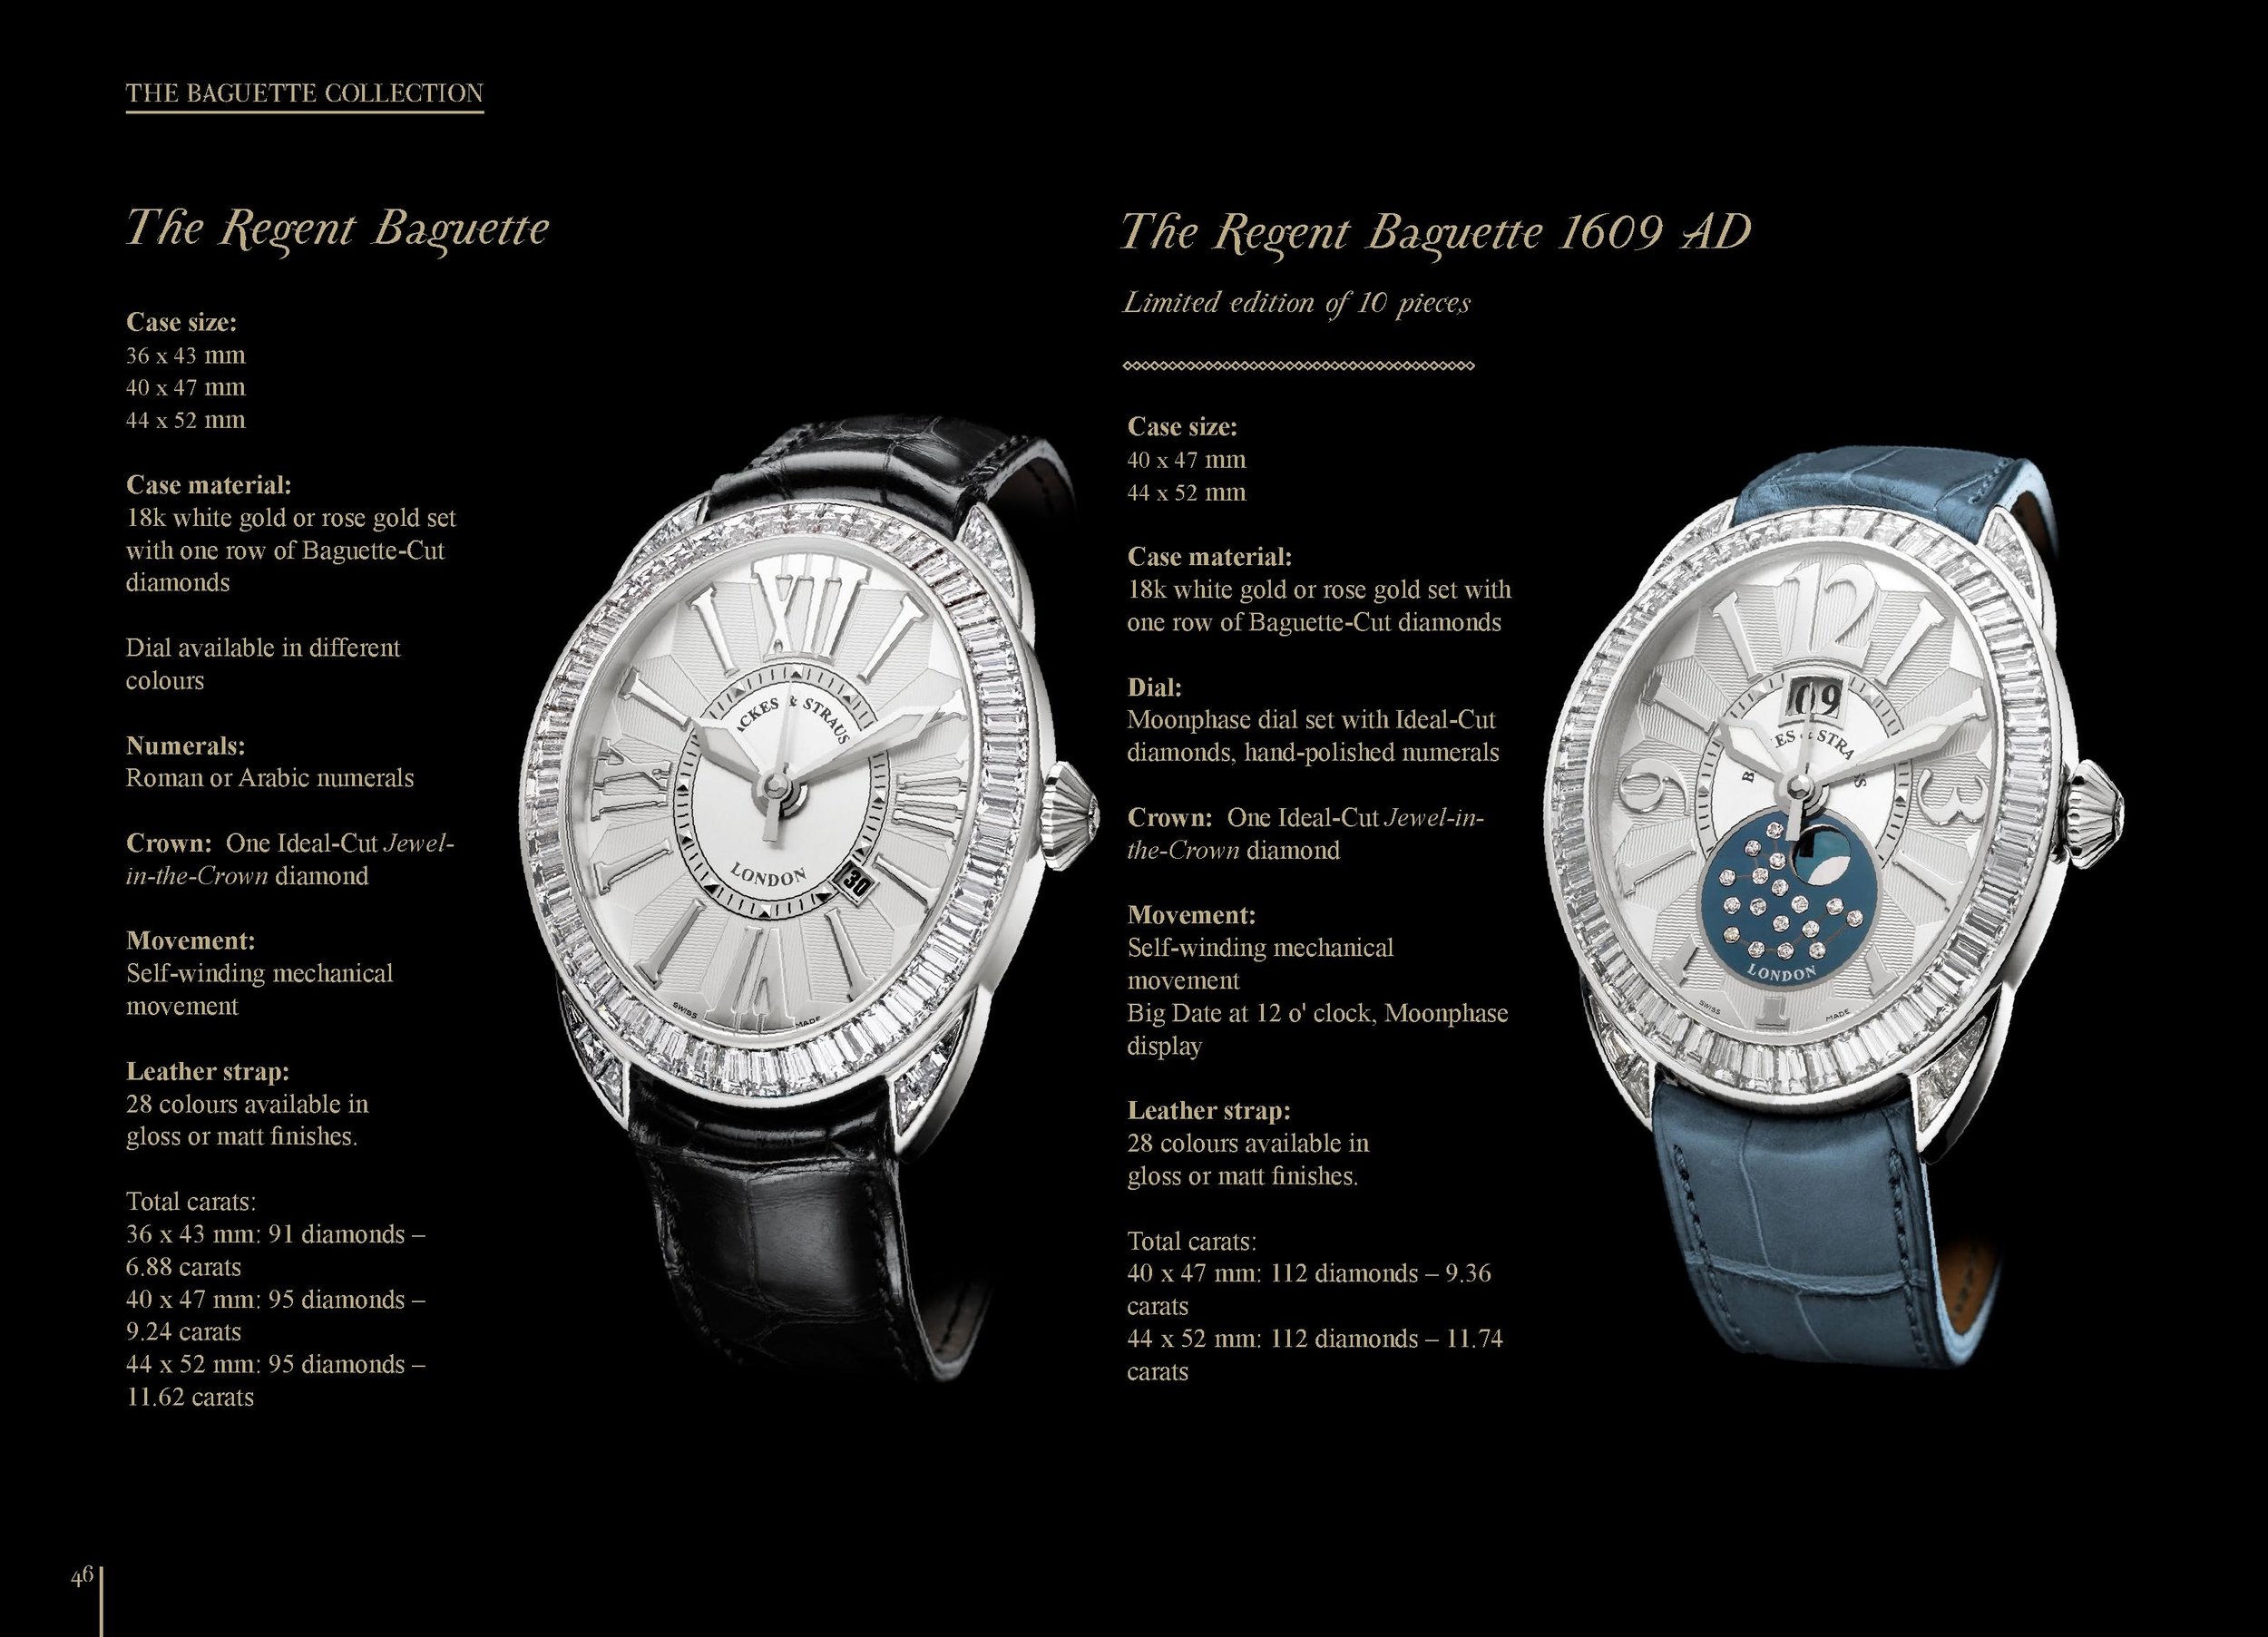 Regent Baguette 4047 and 1609 AD watch